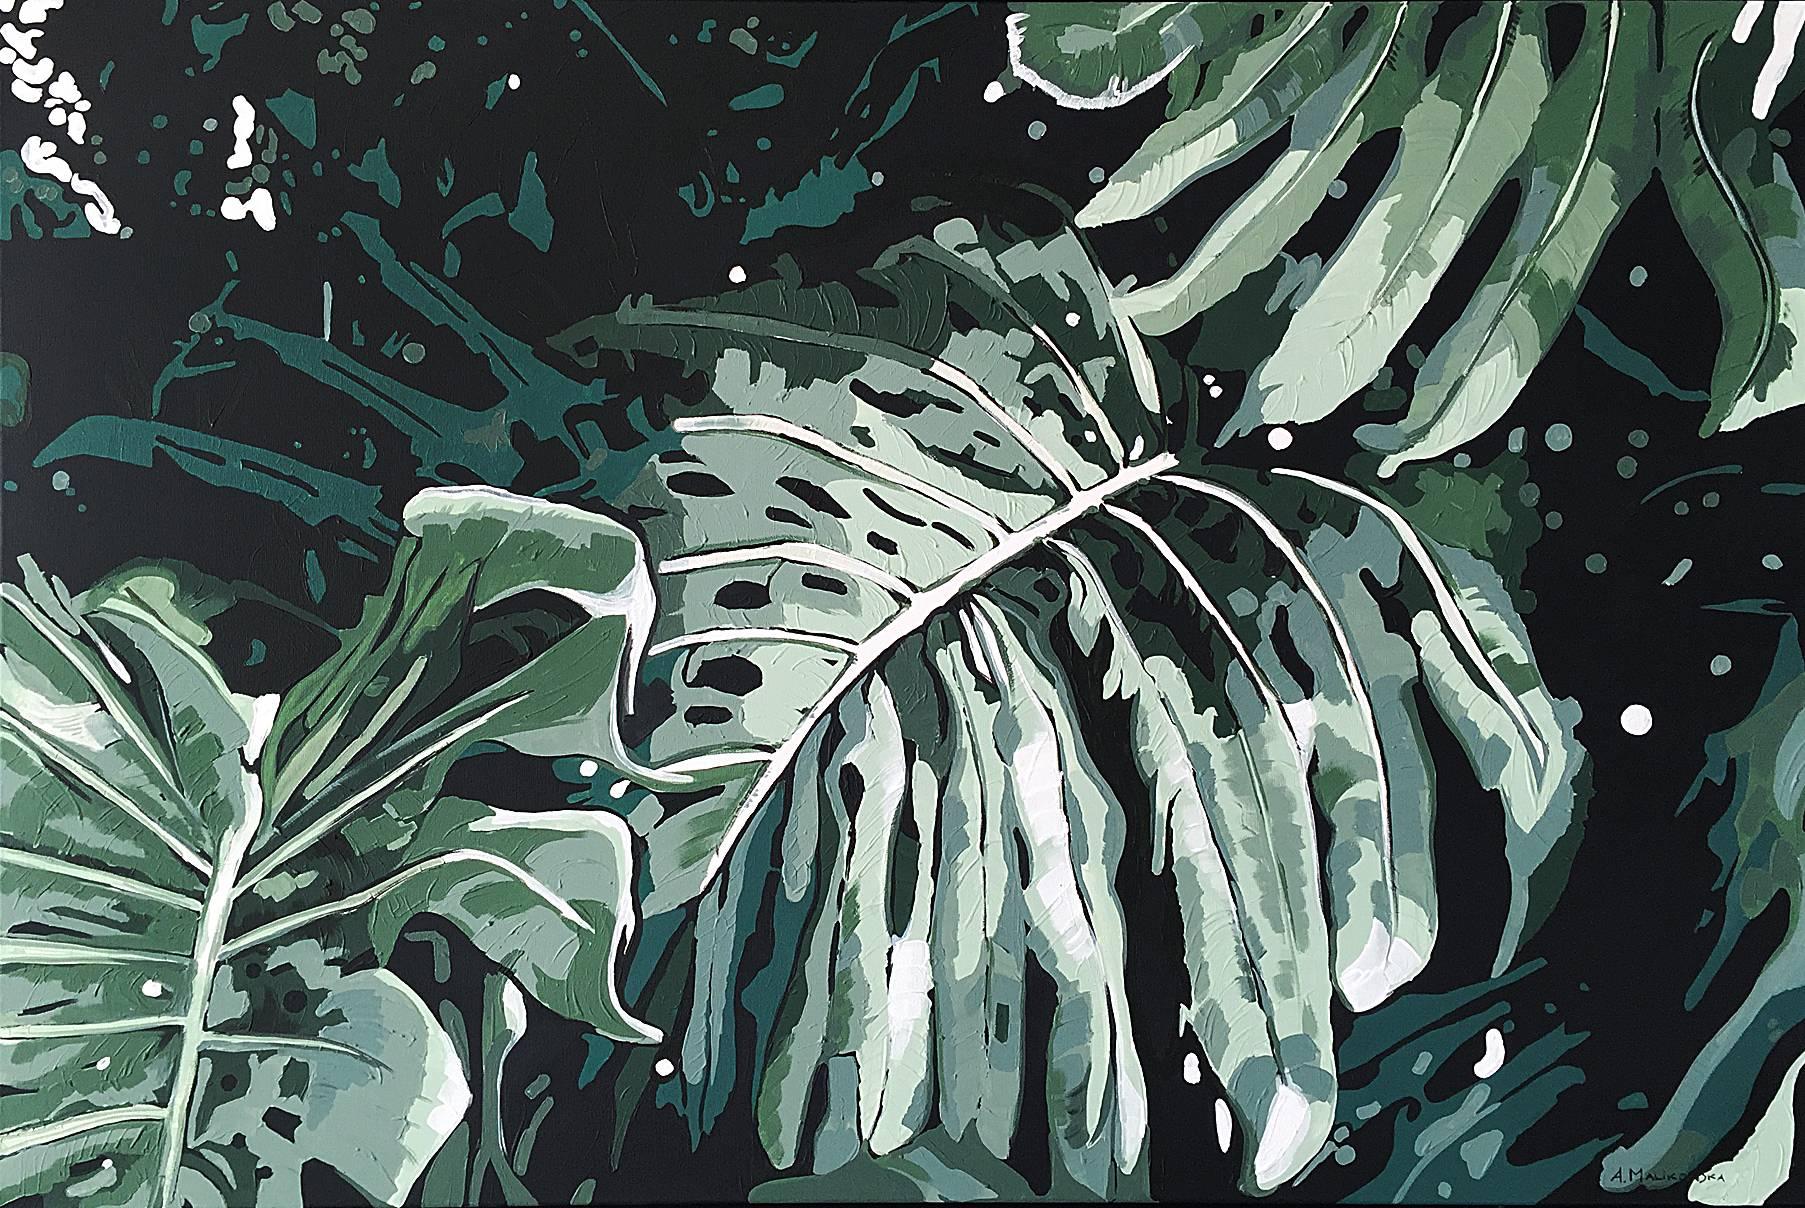 From the Leaves series - luscious tropical rain forest foliage.